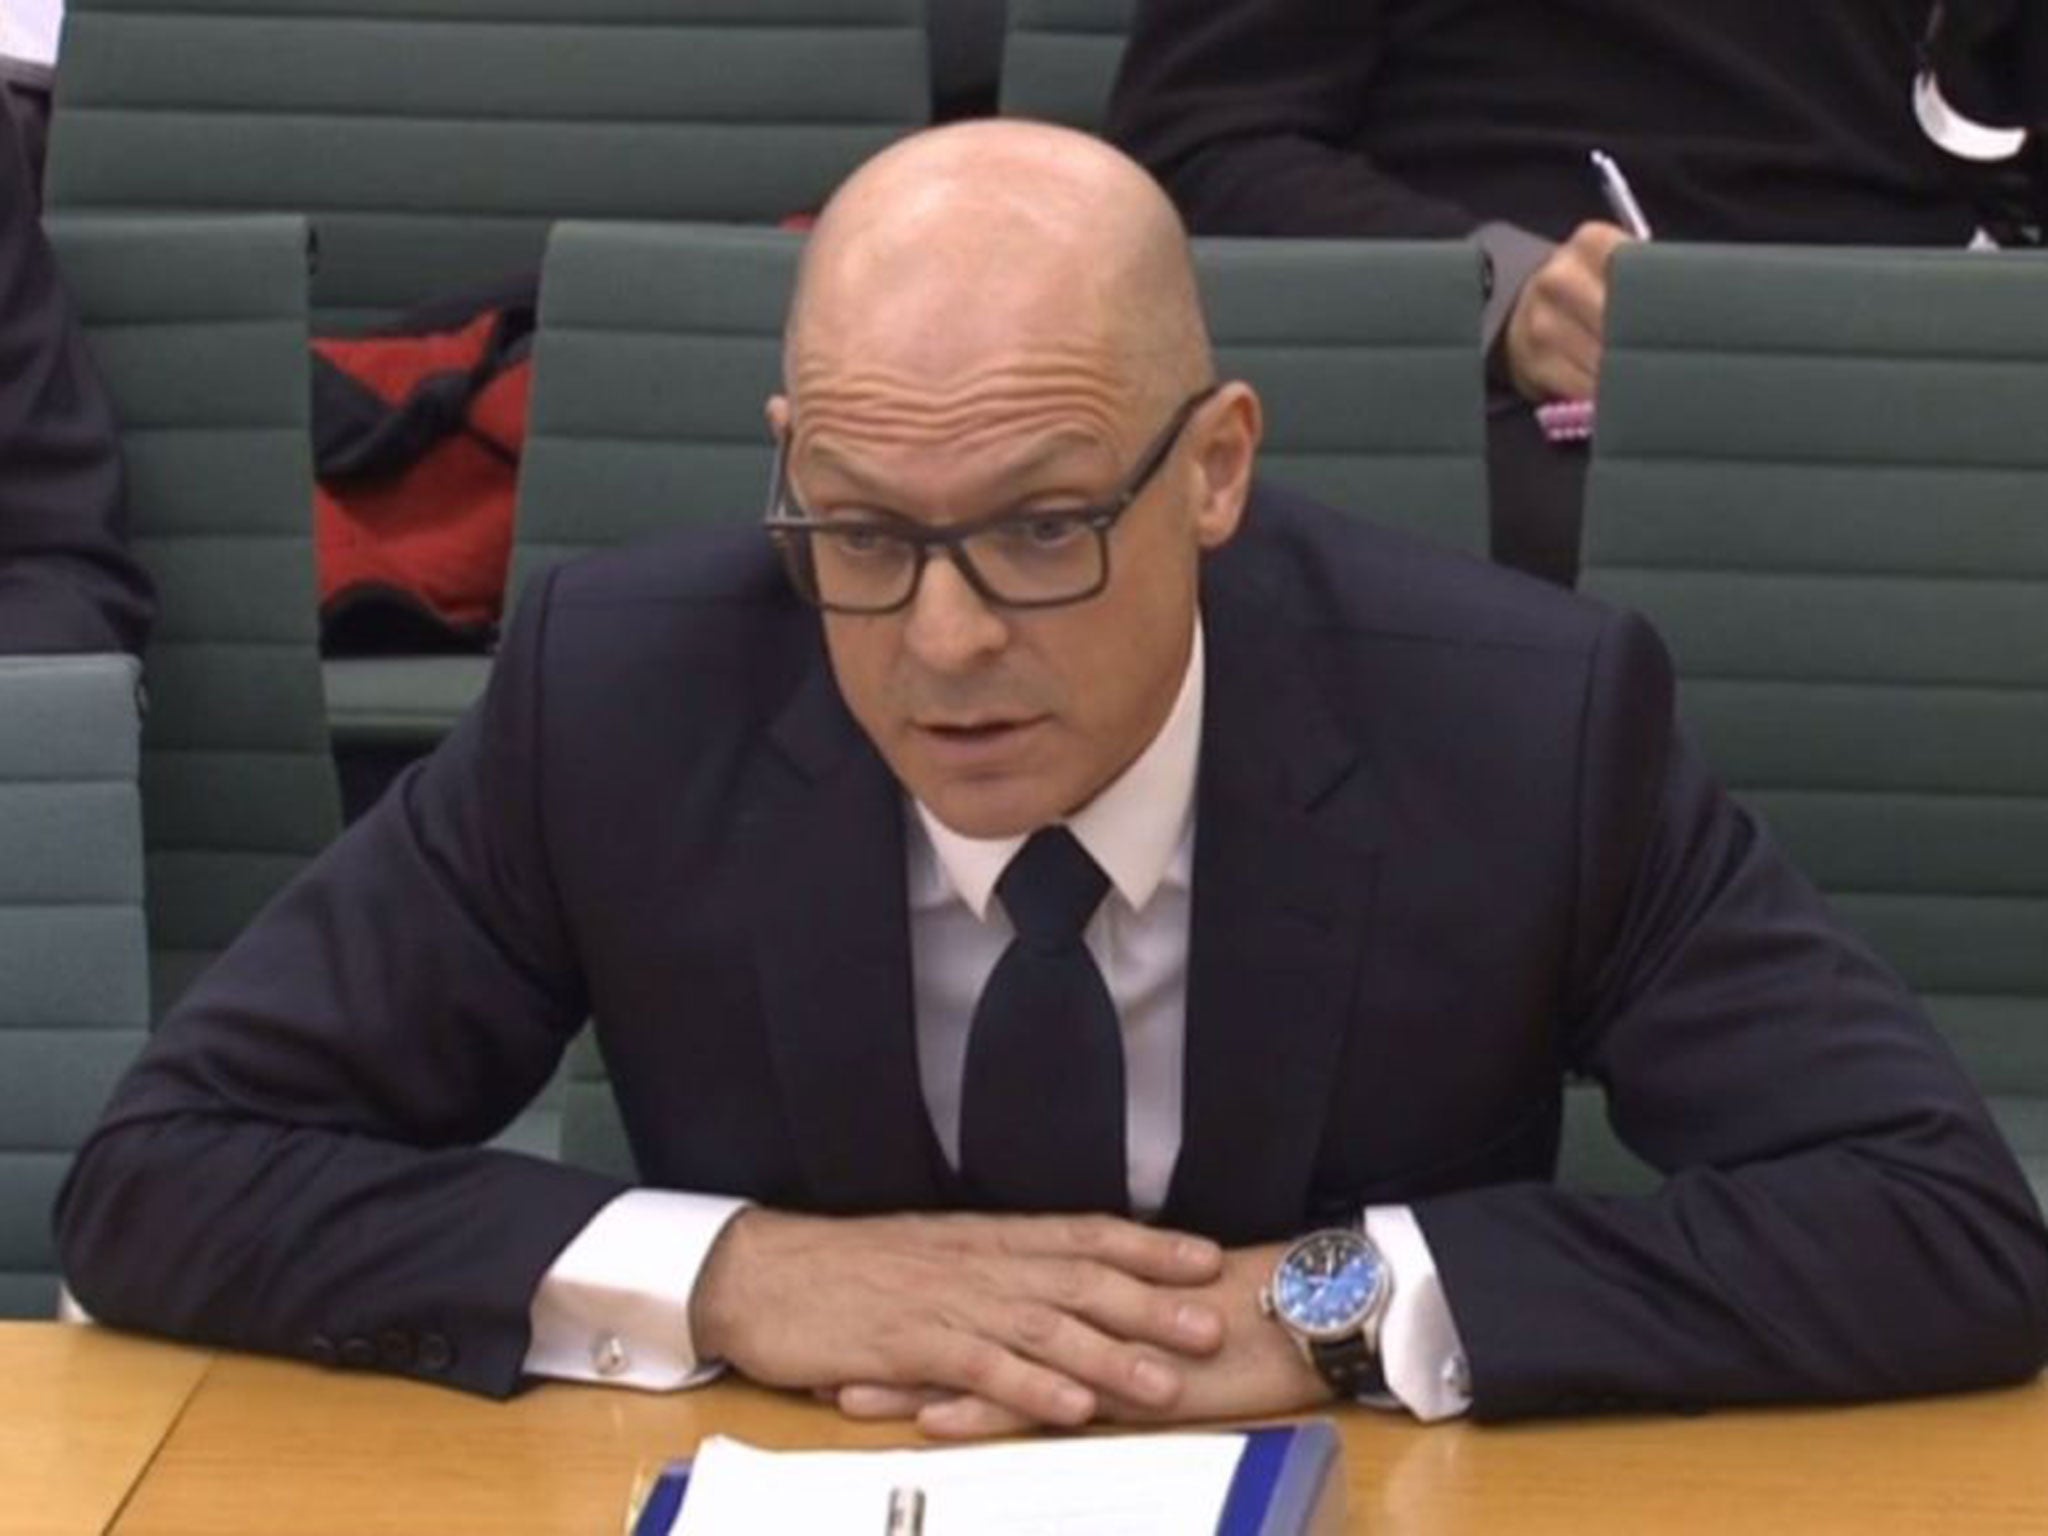 Brailsford was speaking to a Culture, Media and Sport committee